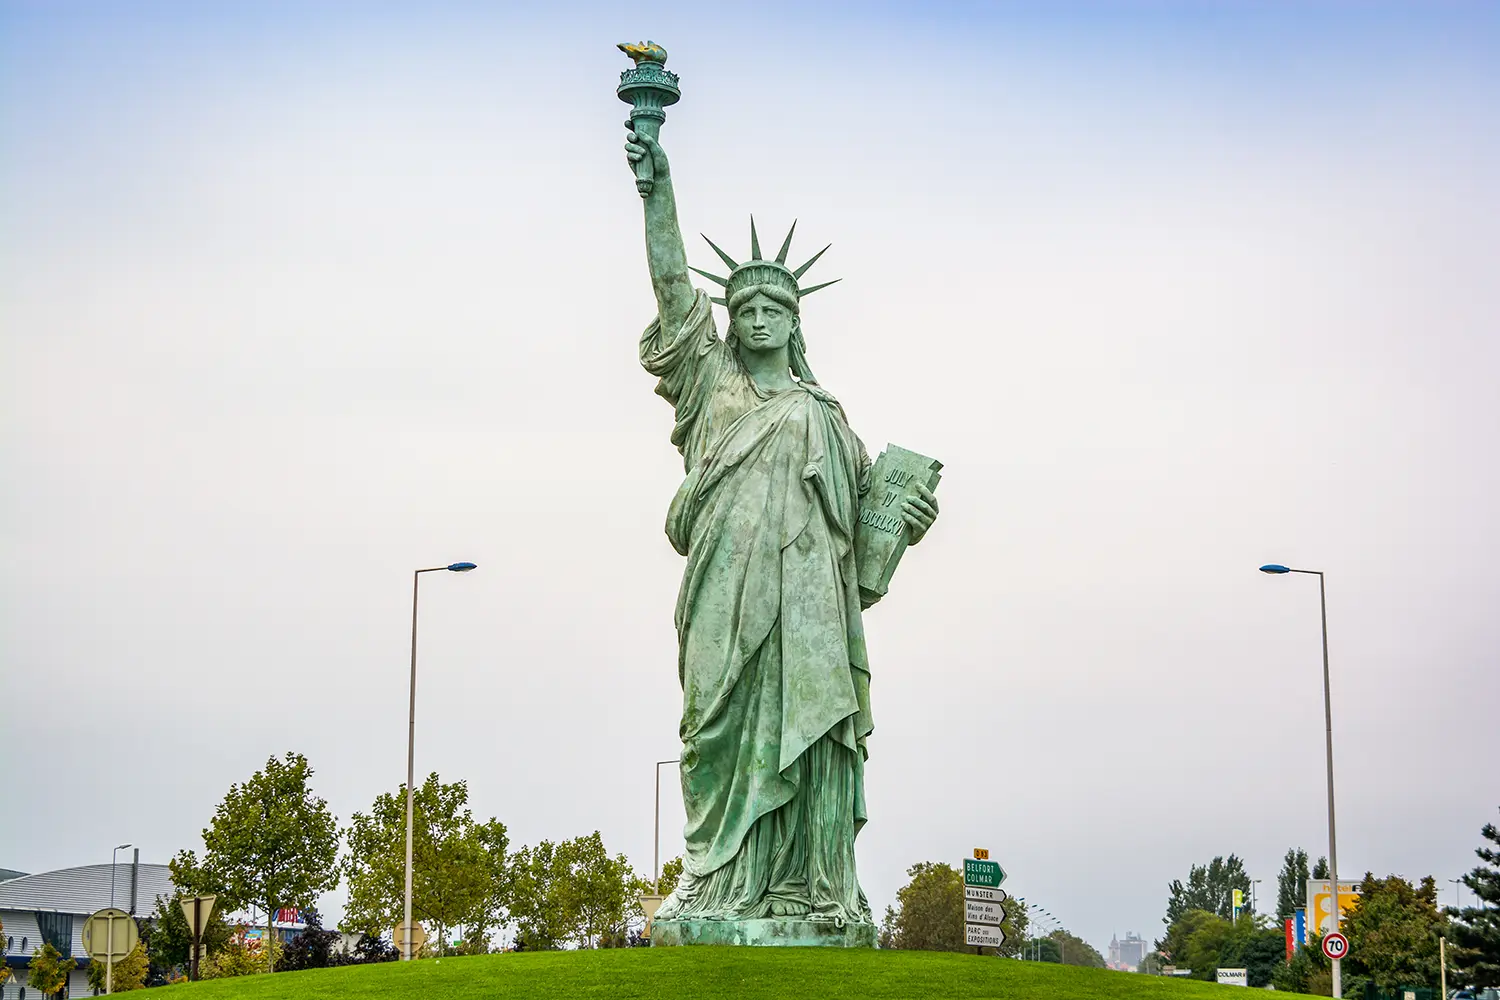 Replica of the statue of liberty in the town of Colmar, in the Alsace region of France, the birthplace of the sculptor Bartholdy.